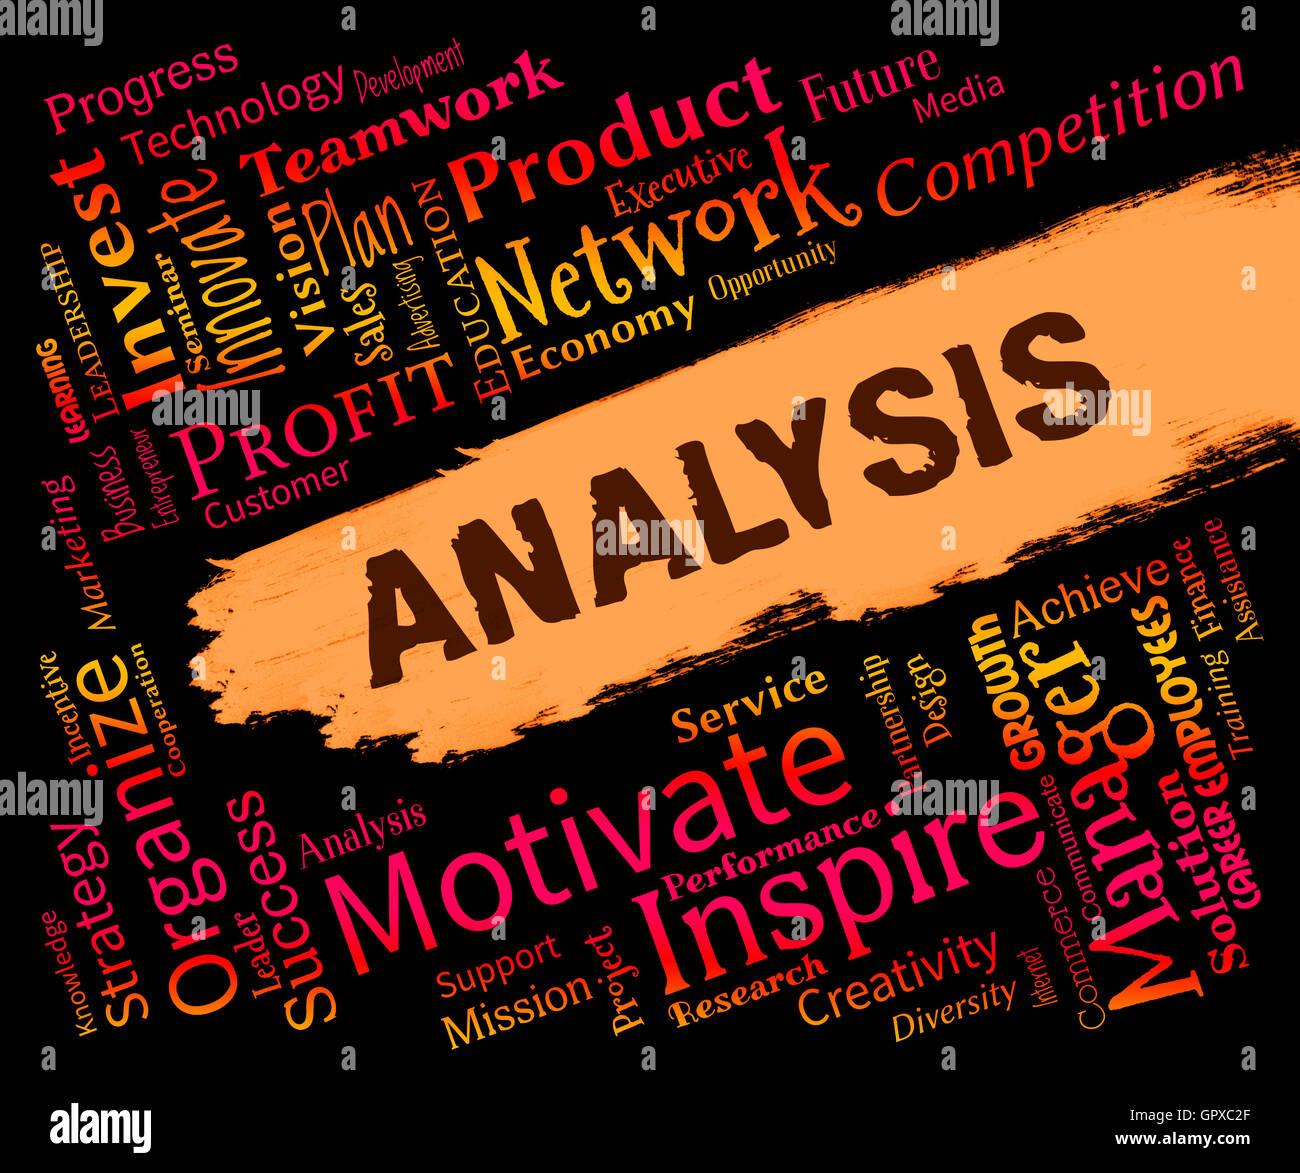 Analyse Word Showing Analytics Analysis Or Analyzing Stock Photo, Picture  and Royalty Free Image. Image 22702234.